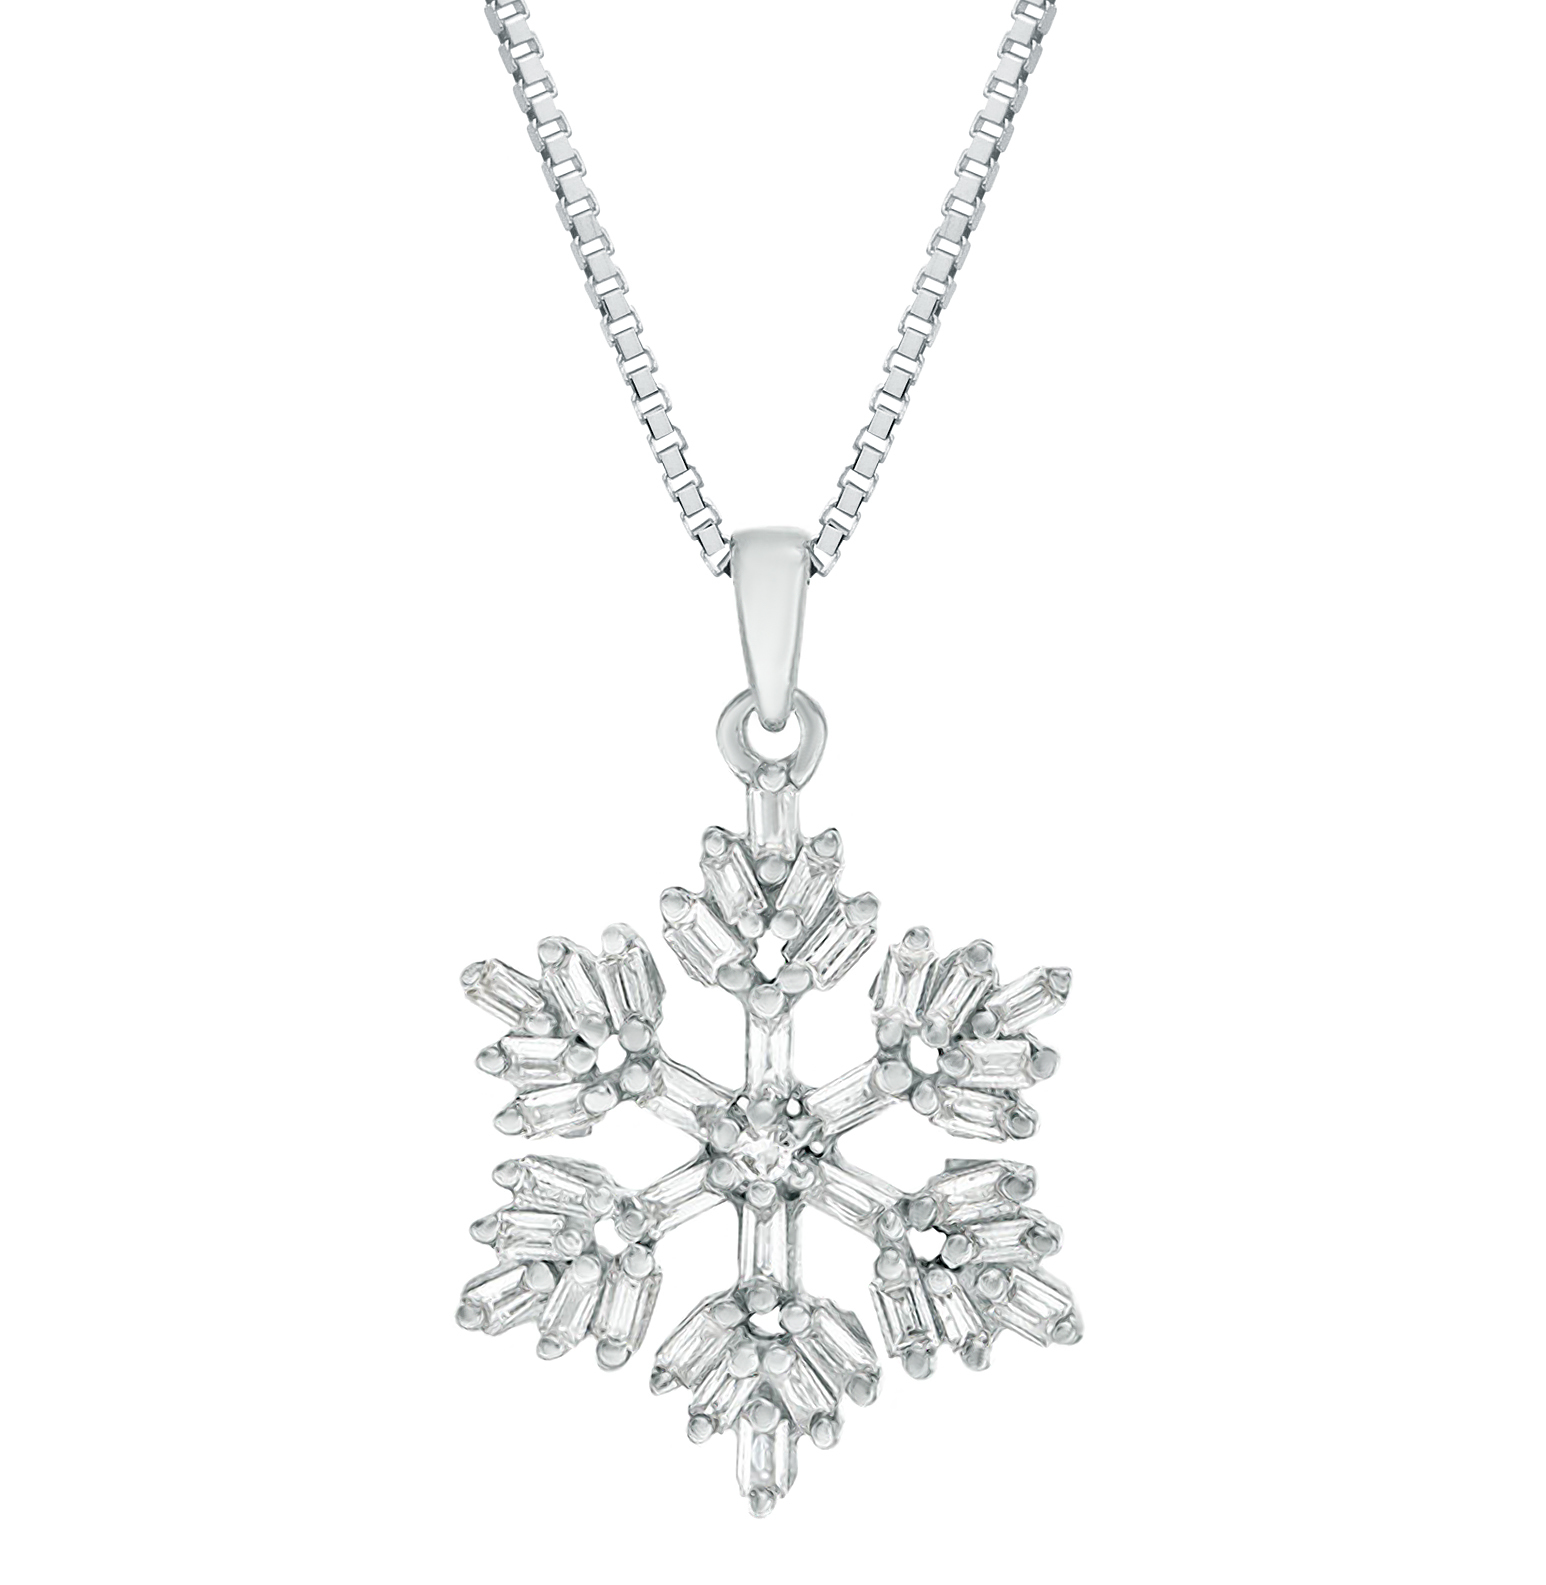 Lavari Jewelers Women's Snowflake Pendant with Lobster Clasp, 925 Sterling Silver, .25 Cttw, 18 Inch Adjustable Chain